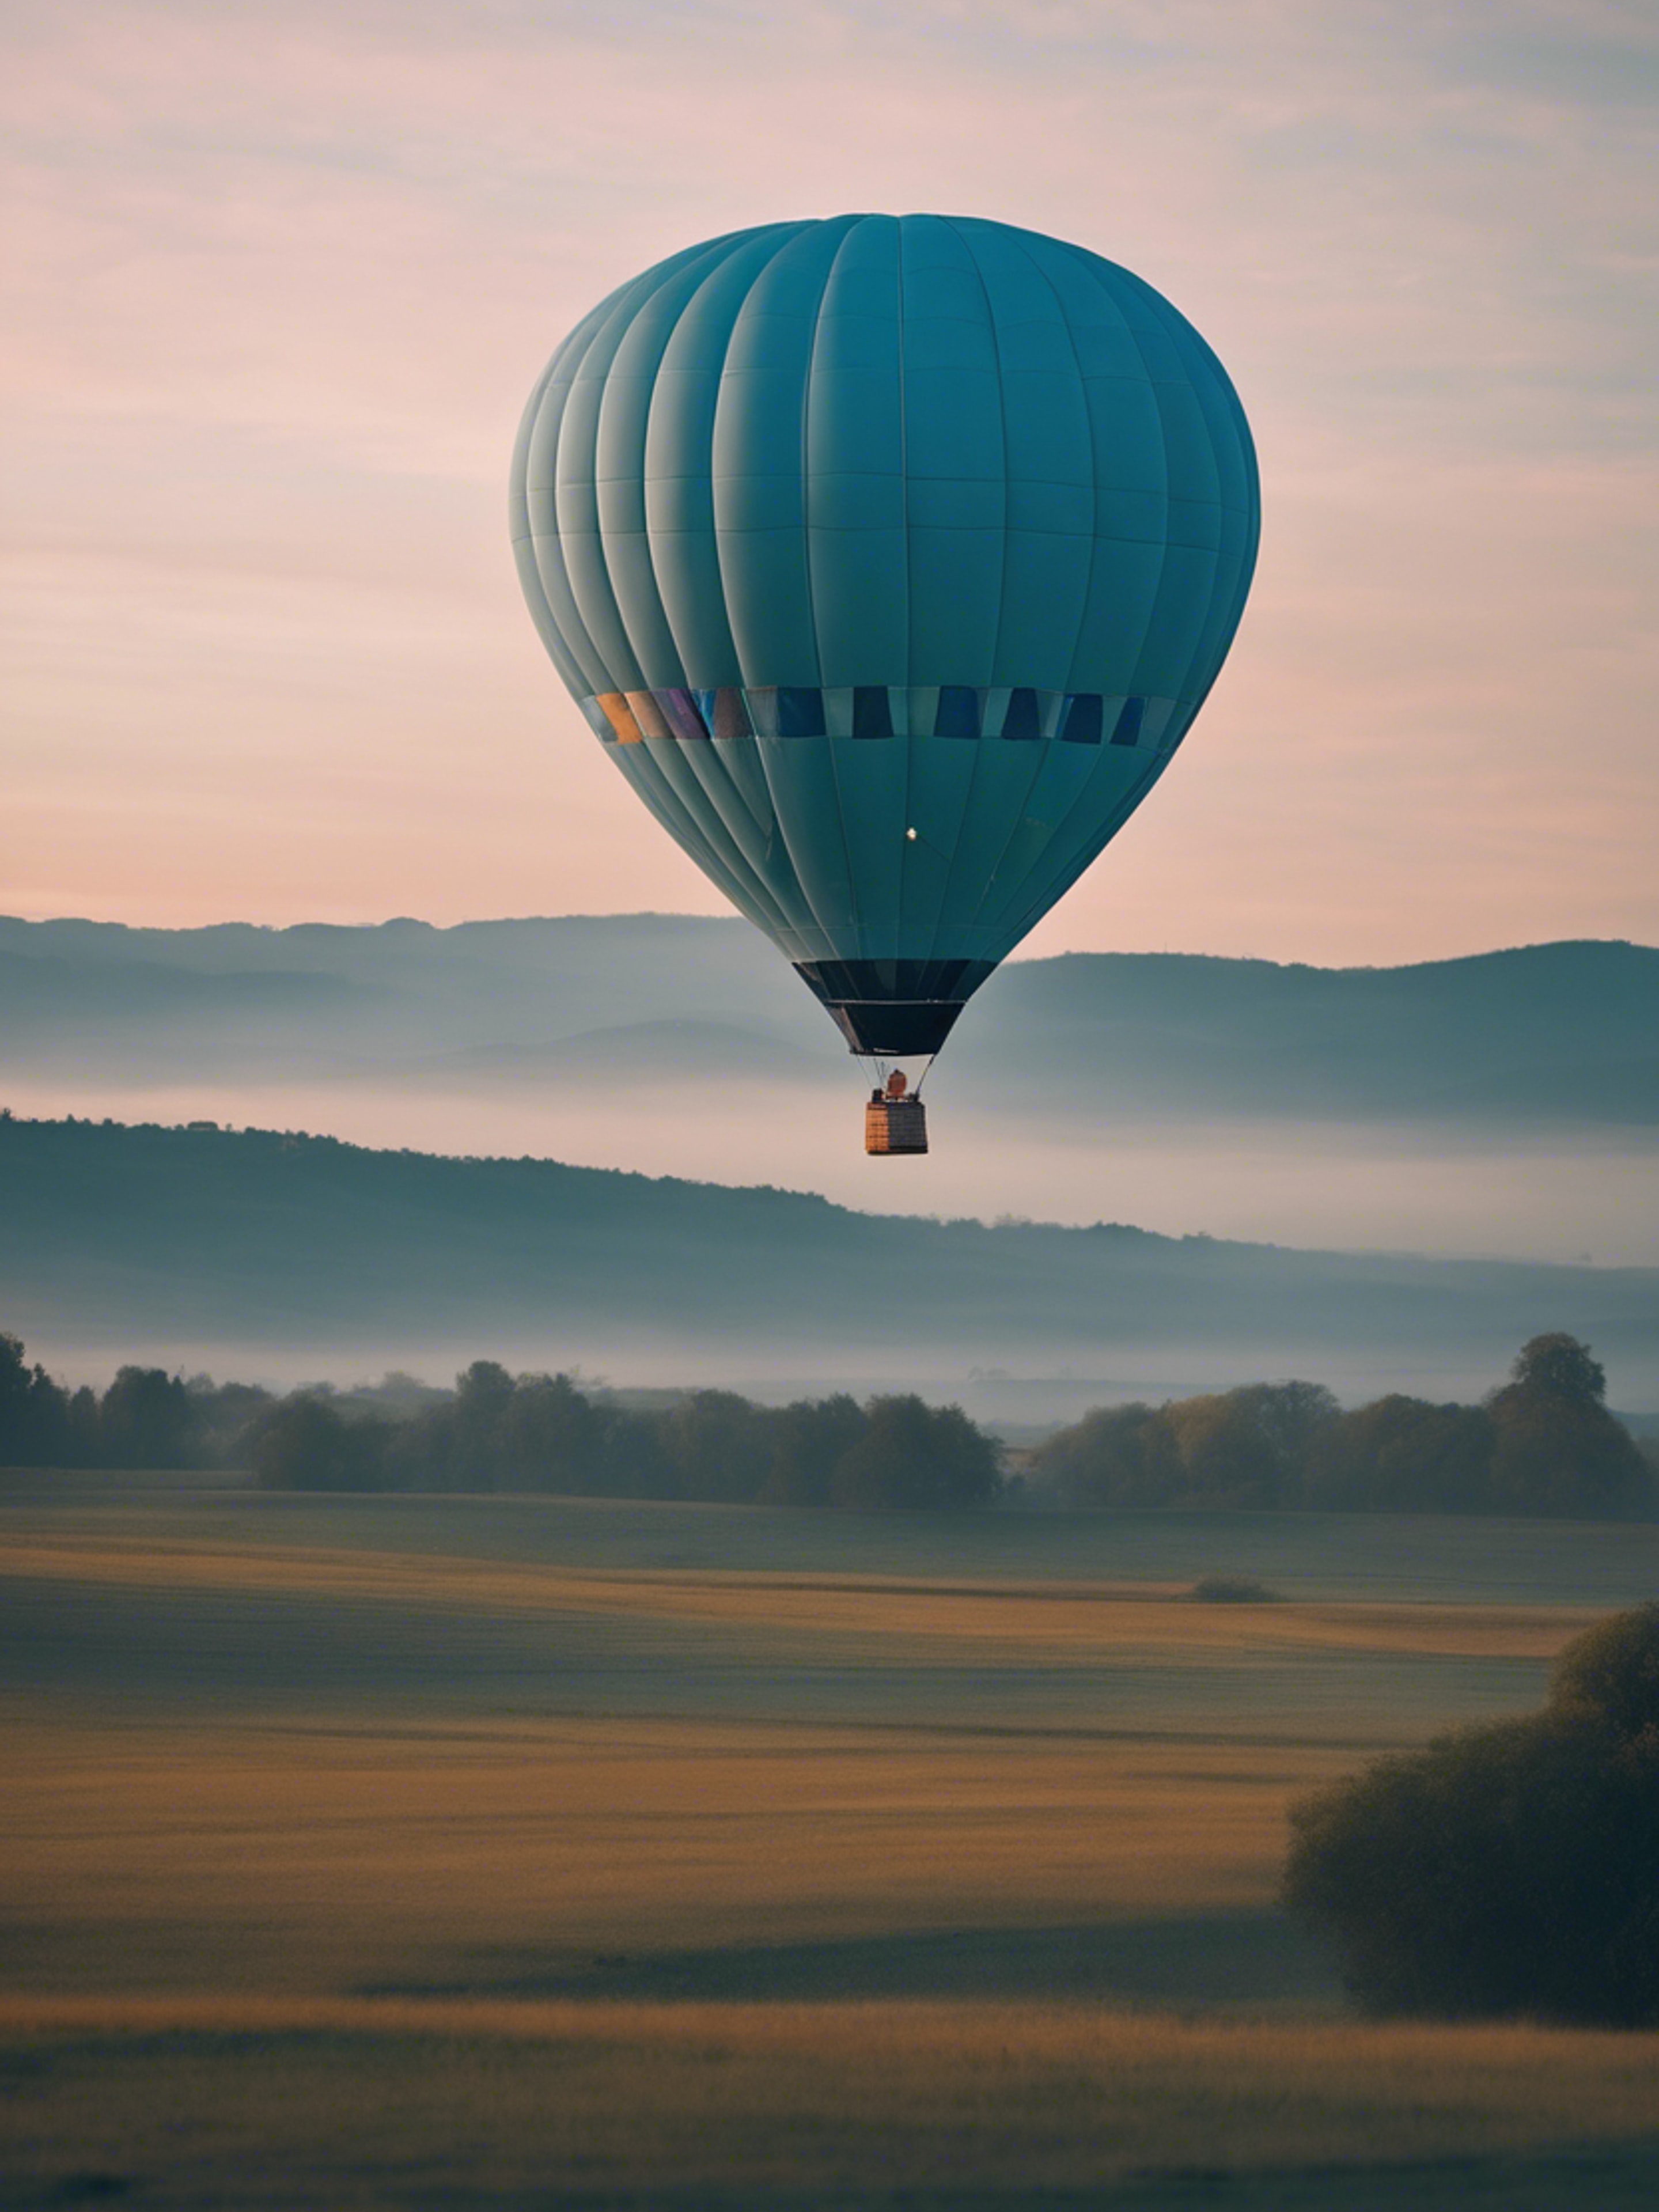 A tranquil scene featuring a pastel blue hot-air balloon floating in the dusk sky. Wallpaper[9f4d0f5899f24b918006]